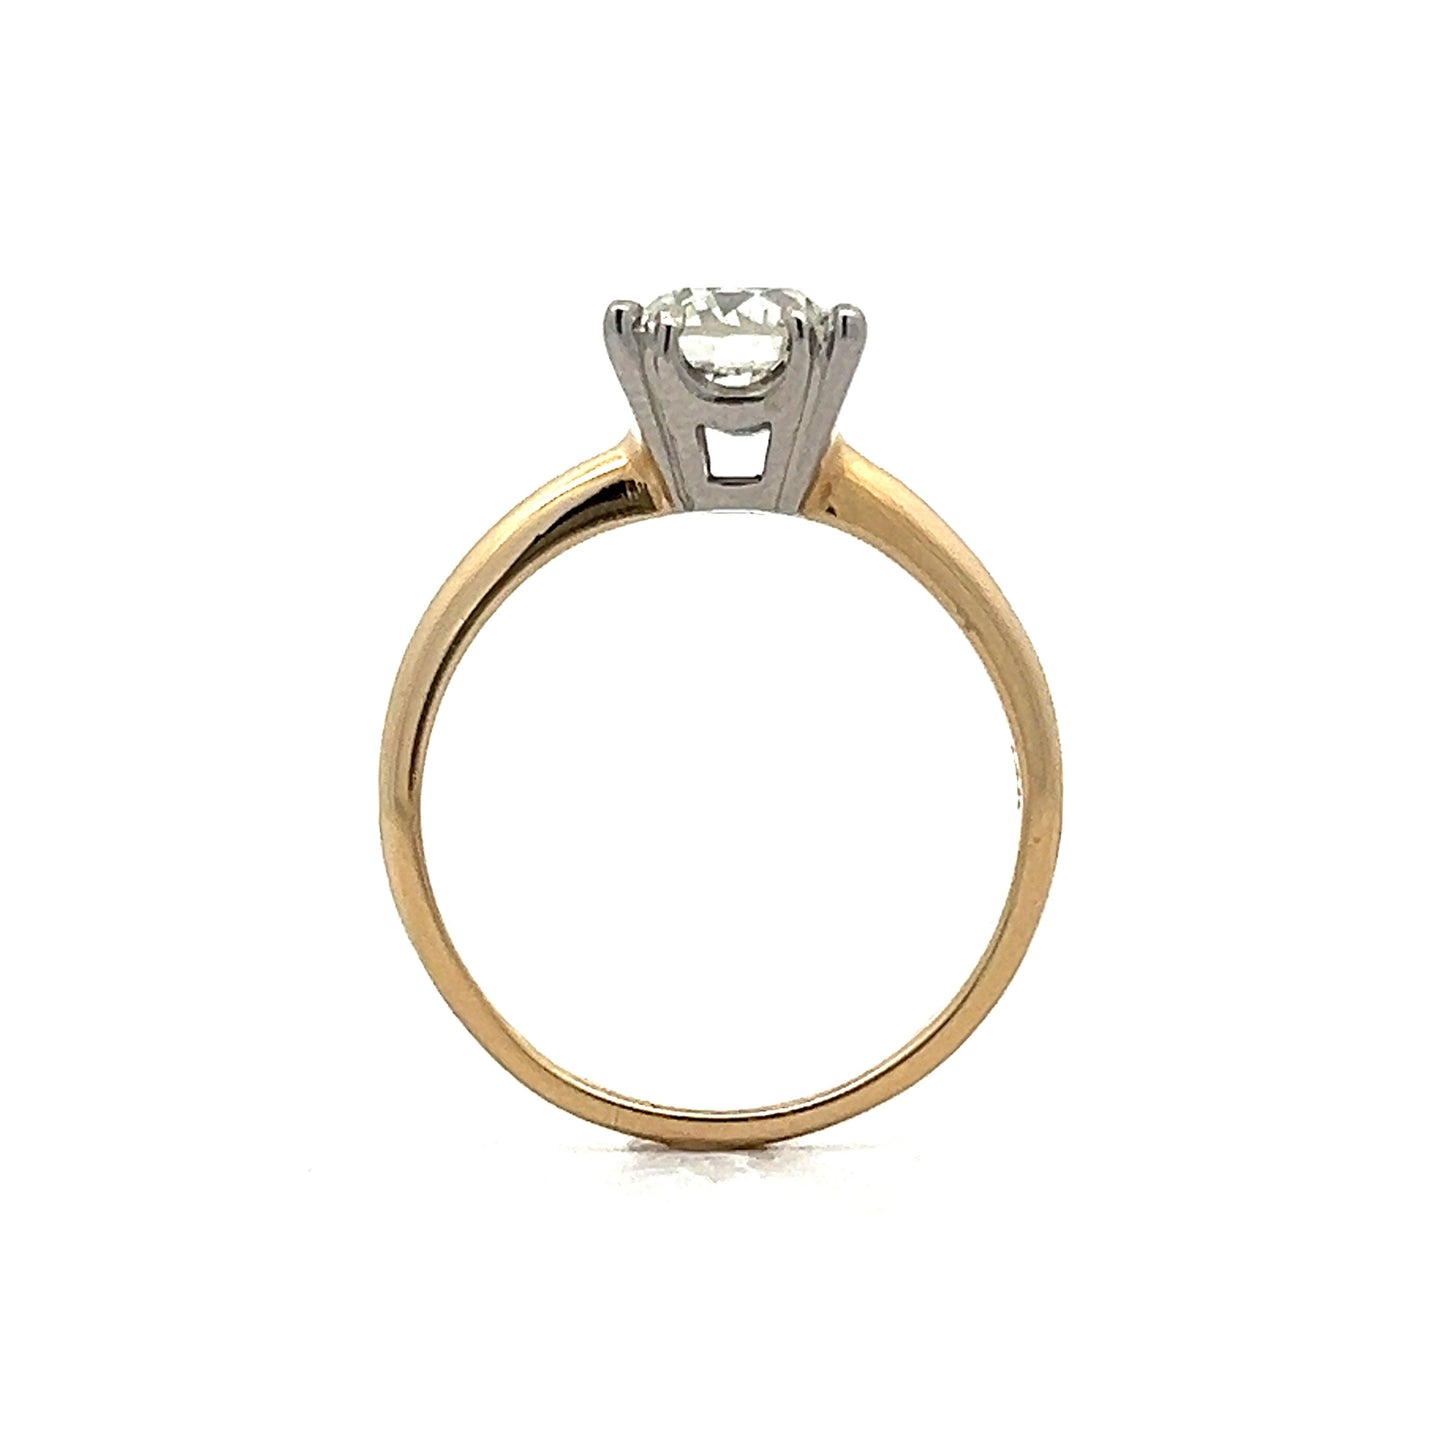 1.54 Retro Diamond Solitaire Engagement Ring in 14k Yellow & White Gold